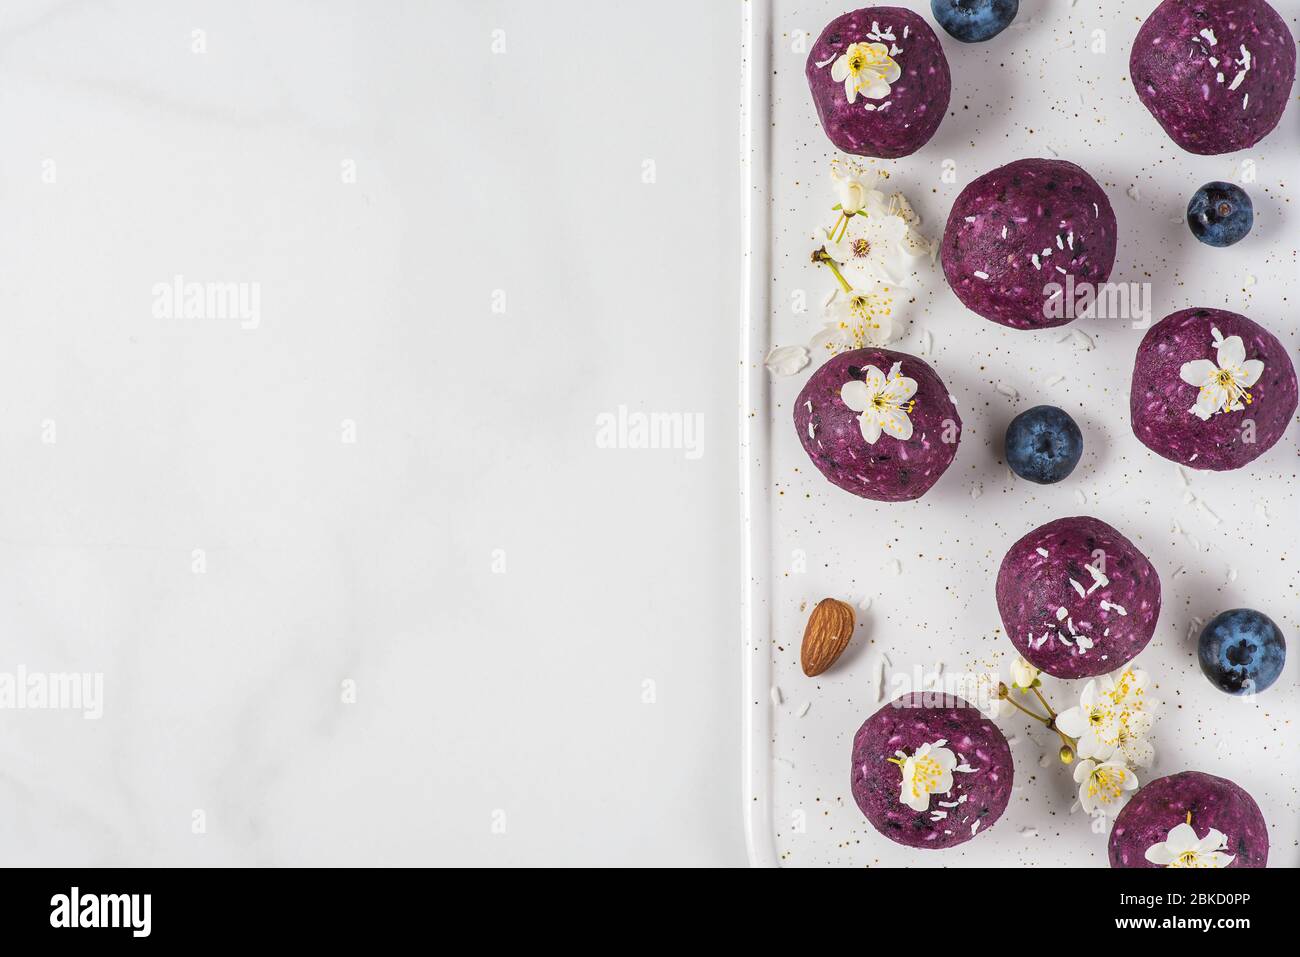 Raw vegan energy balls or bites made of blueberry, acai, nuts and dates served with flowers. top view with copy space. Food styling. Healthy dessert Stock Photo